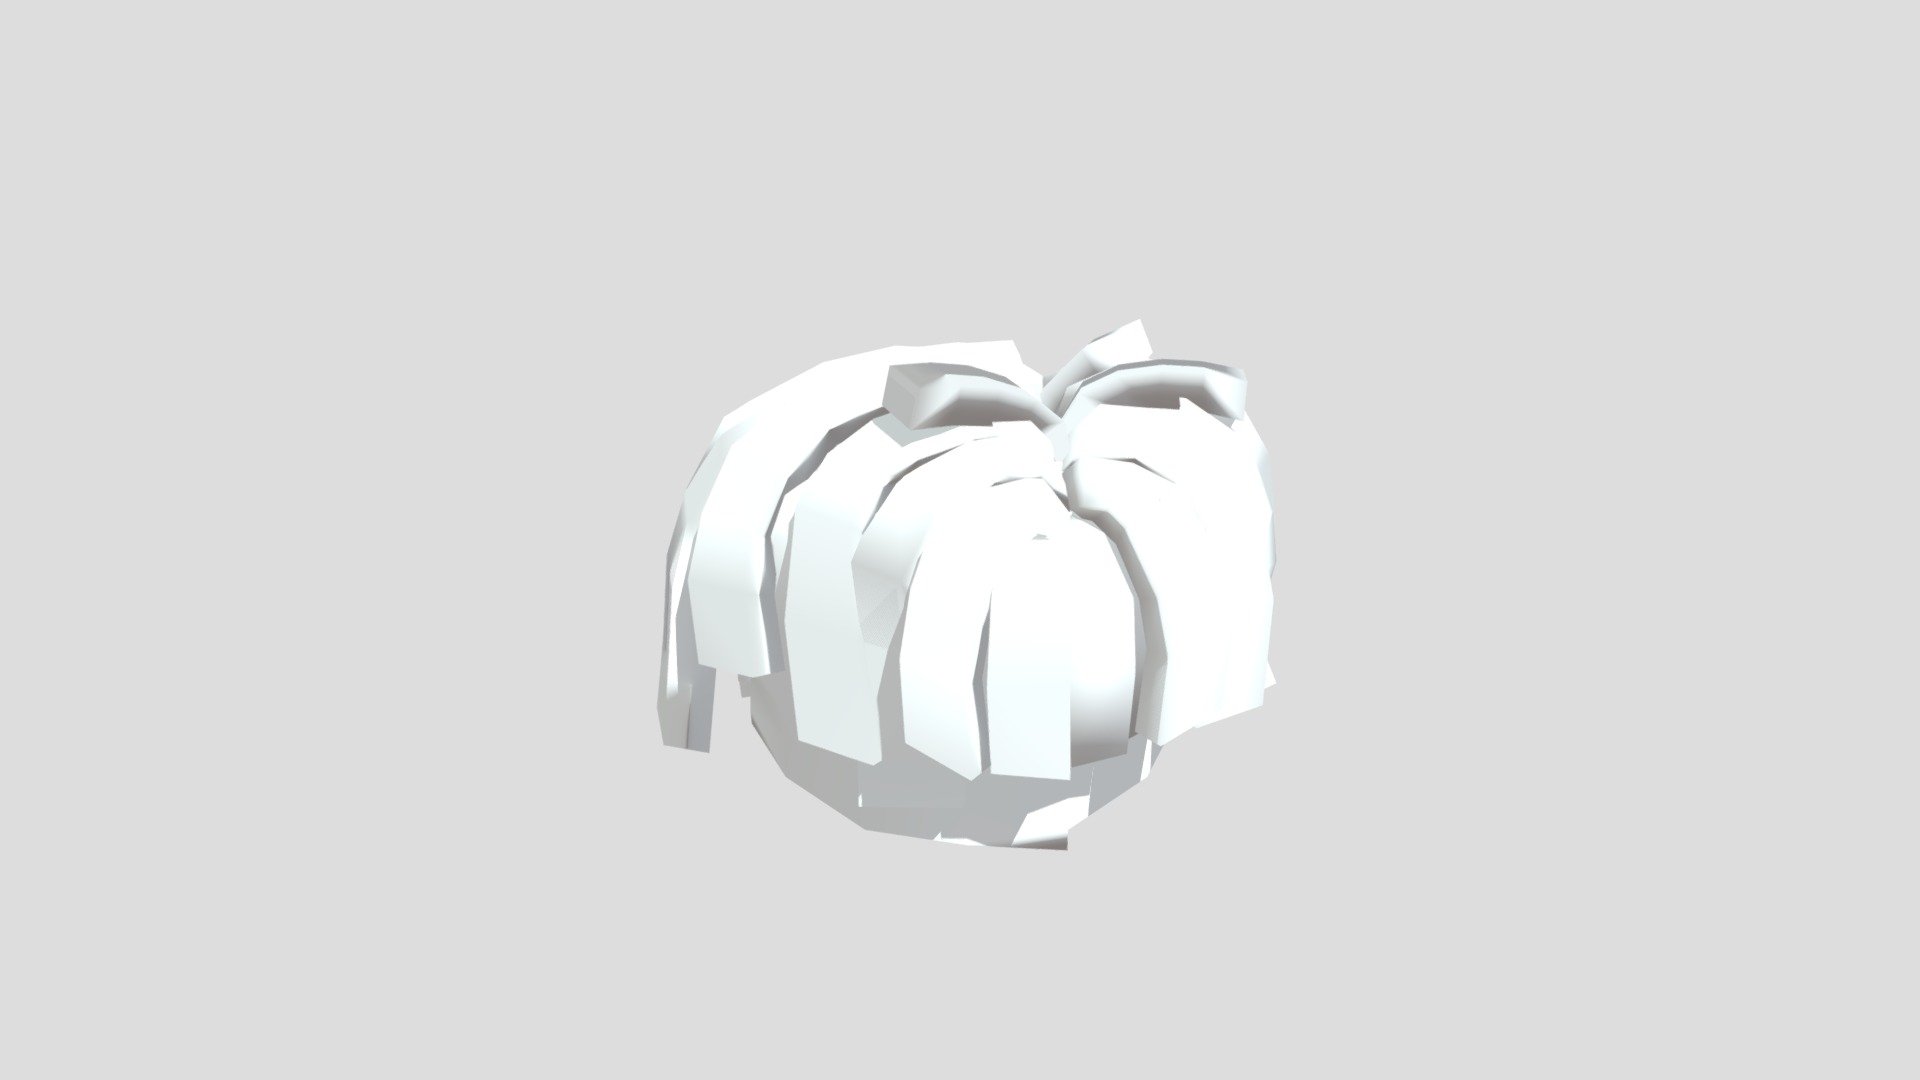 Roblox-Bacon-Hair - Download Free 3D model by Roblox (@Robloxs) [88a62bc]